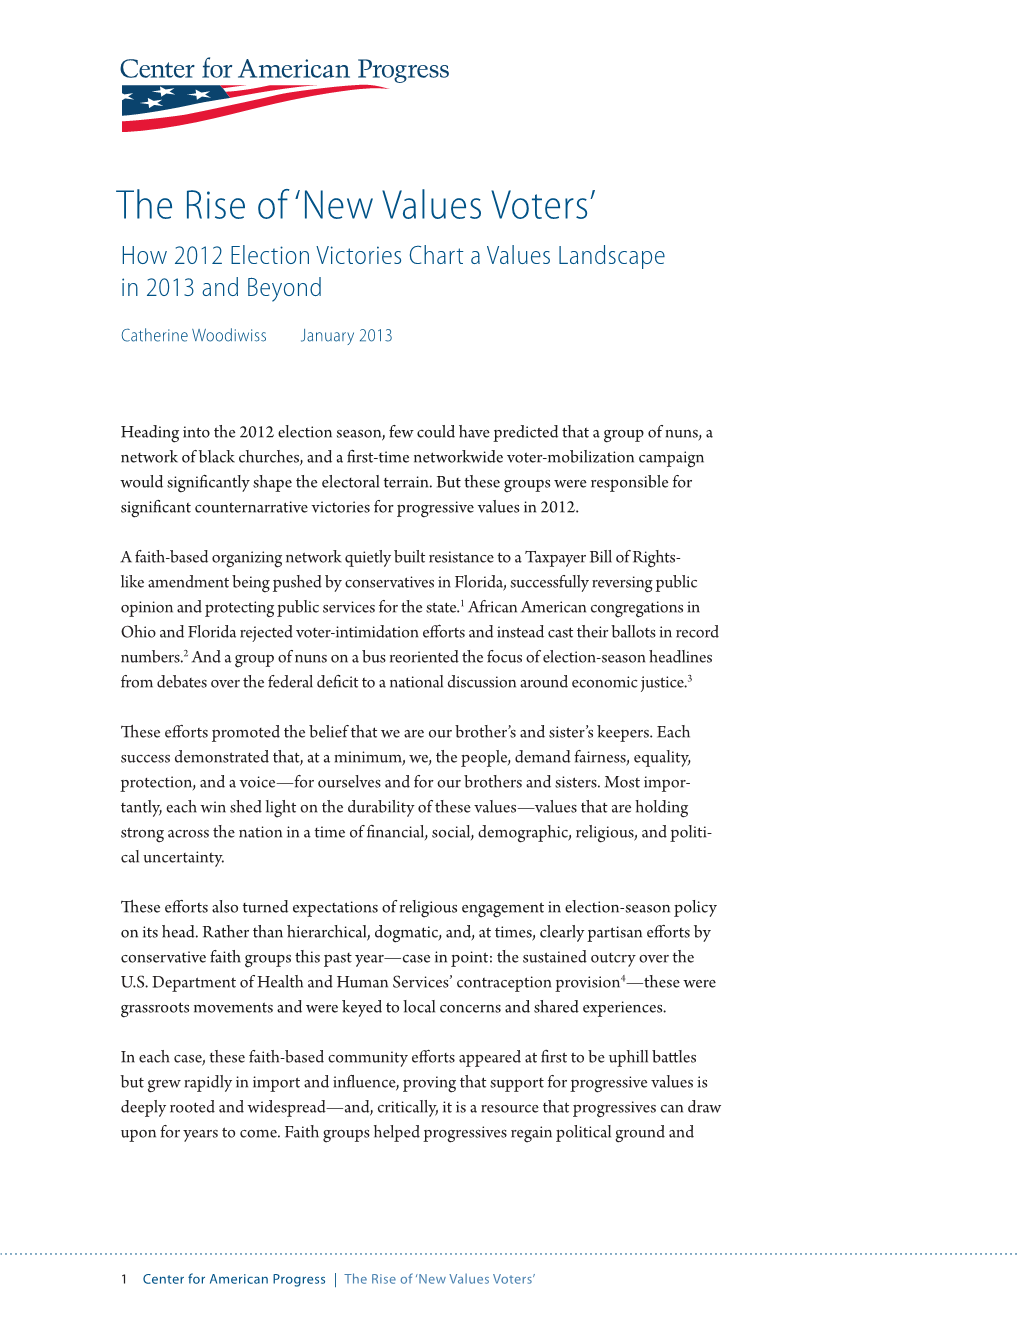 New Values Voters’ How 2012 Election Victories Chart a Values Landscape in 2013 and Beyond